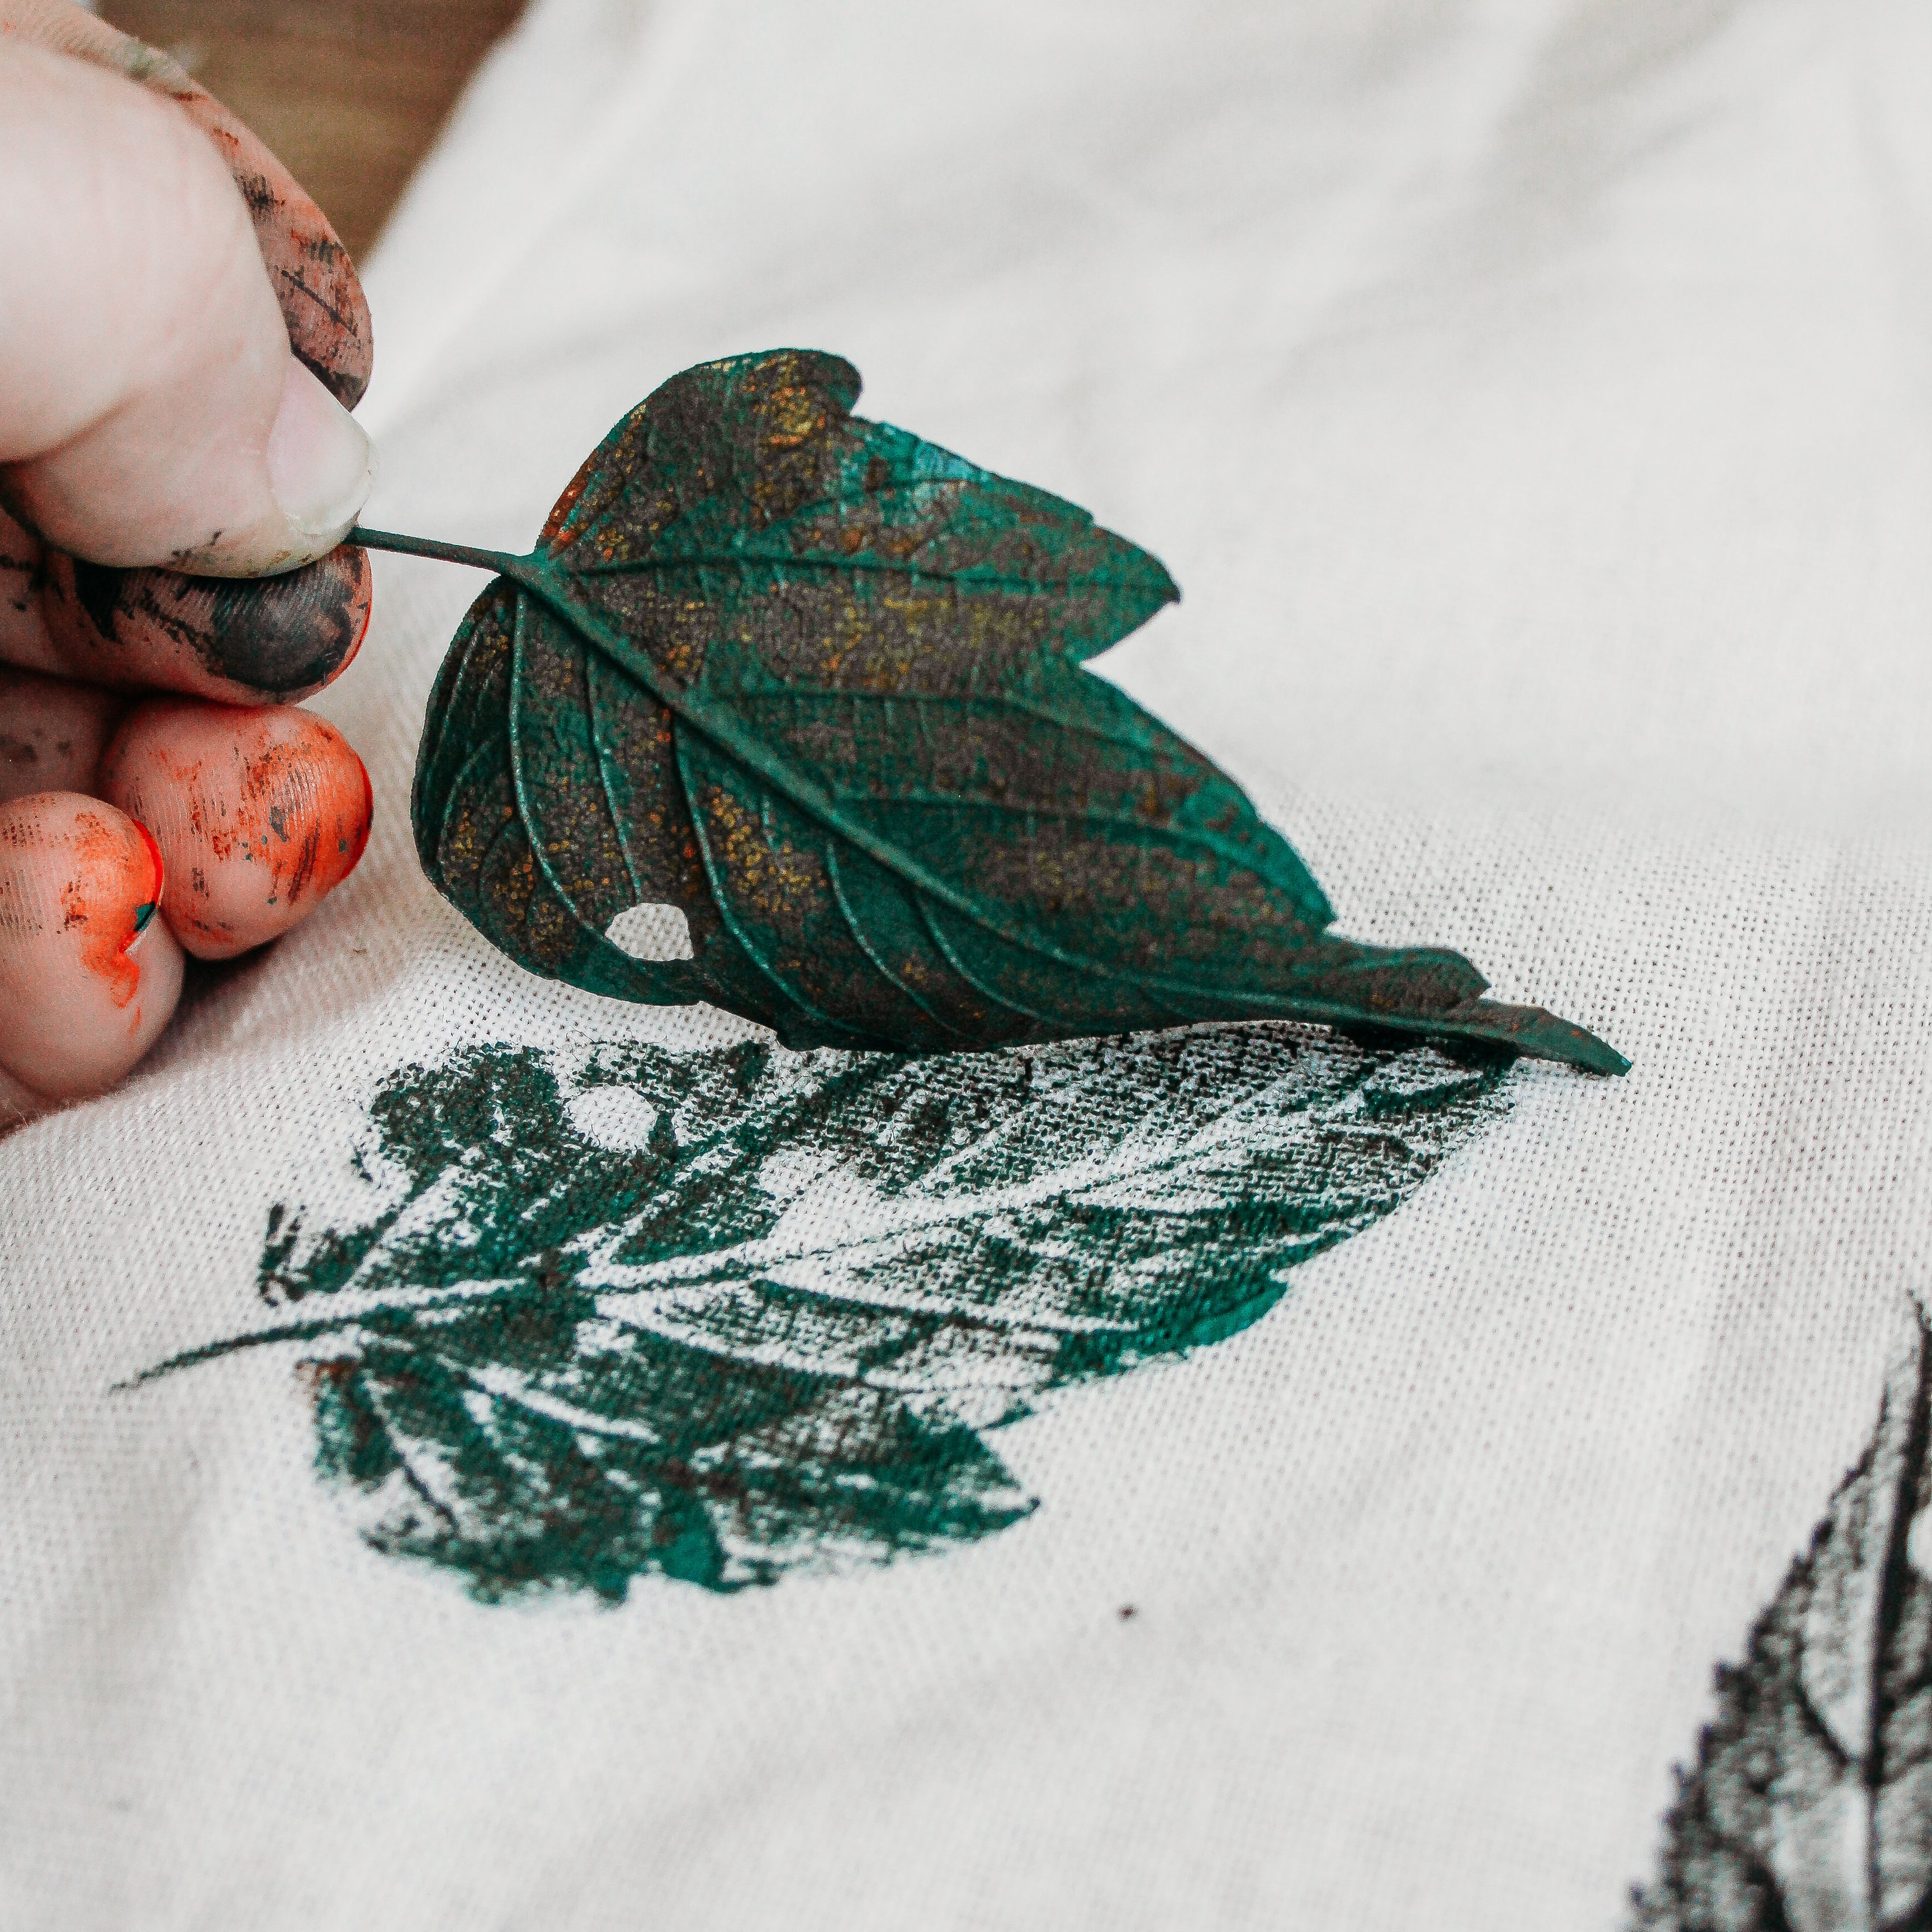 A printed leaf is being lifted from a canvas bag.